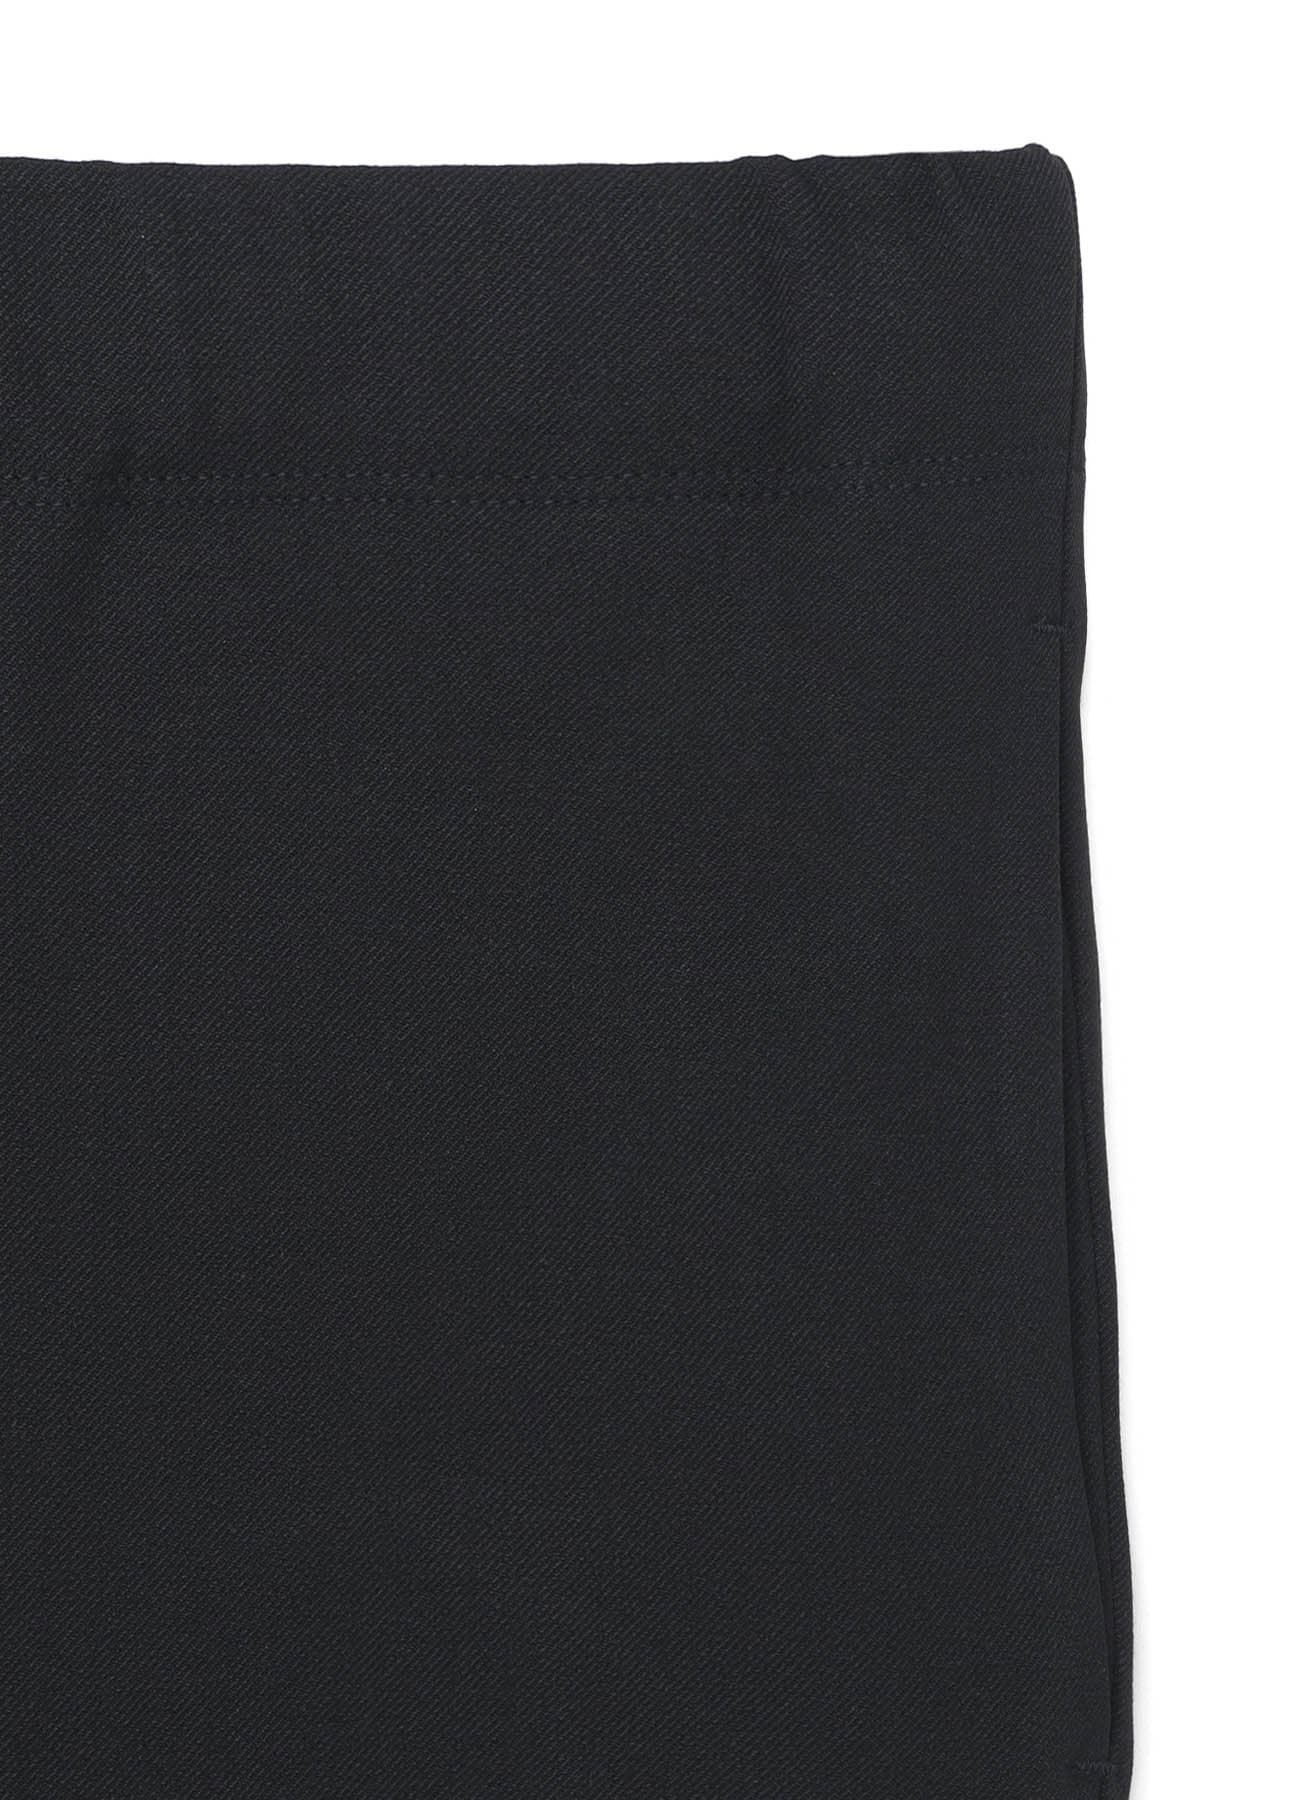 2WAY STRETCH SLIM PANTS(FREE SIZE Black): Y's for living｜THE SHOP